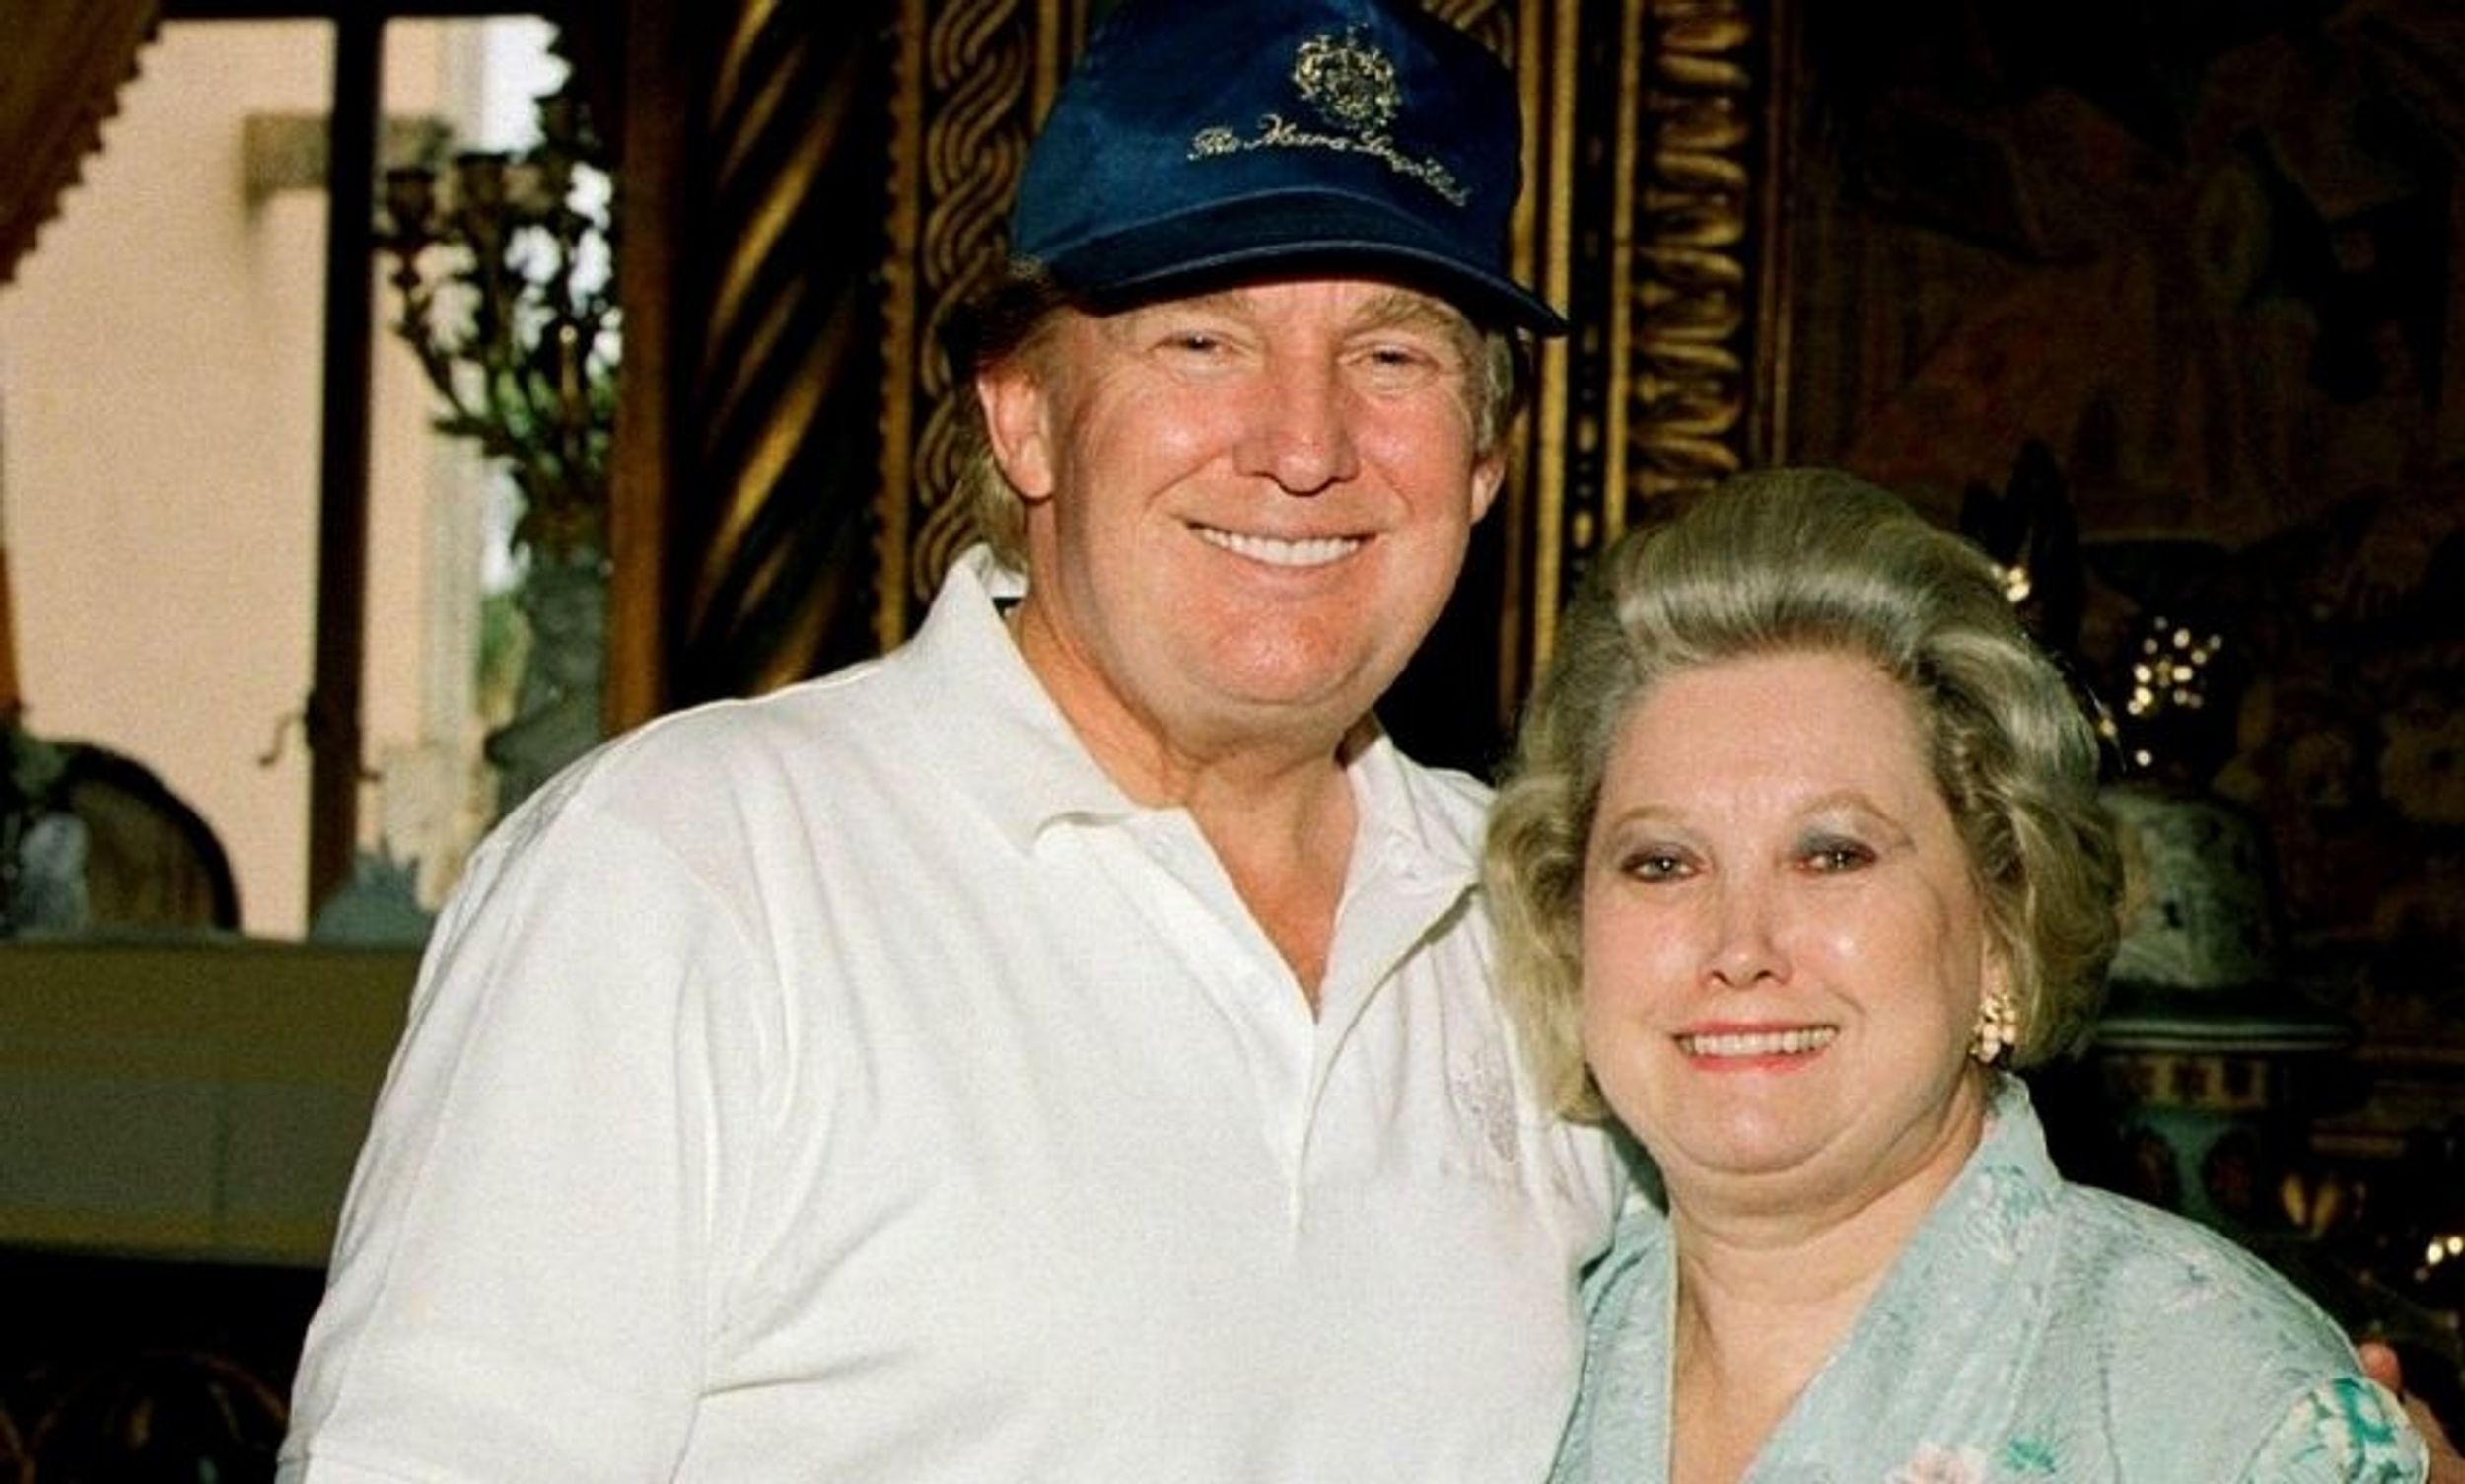 Trump Thanked His Sister for Her Support on Twitter and Turns Out It Was a Parody Account